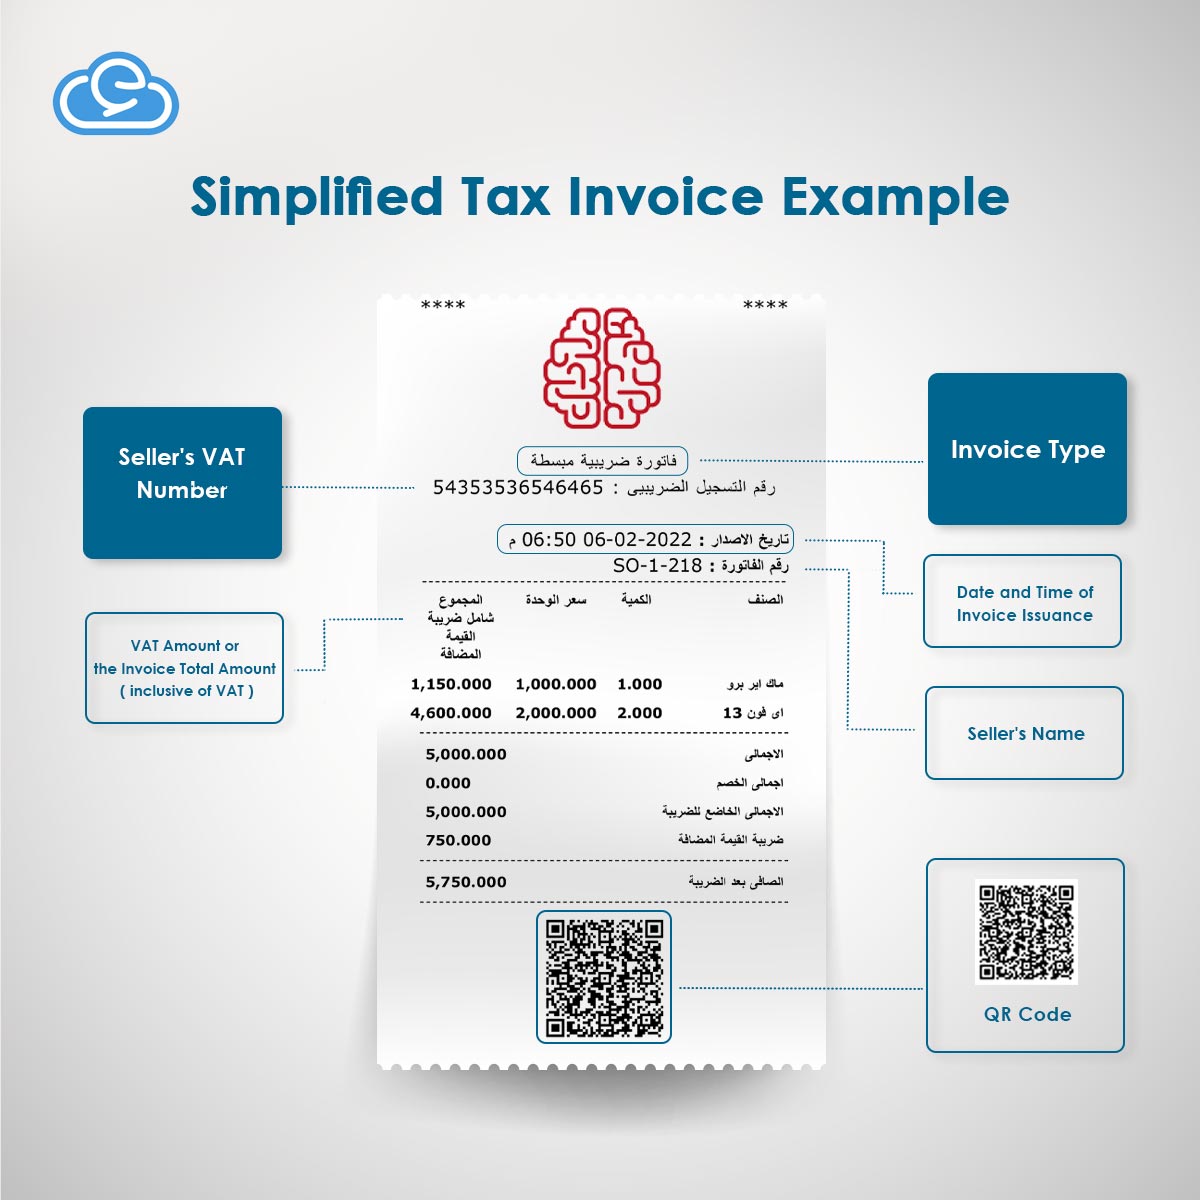 Simplified Tax Invoice Example